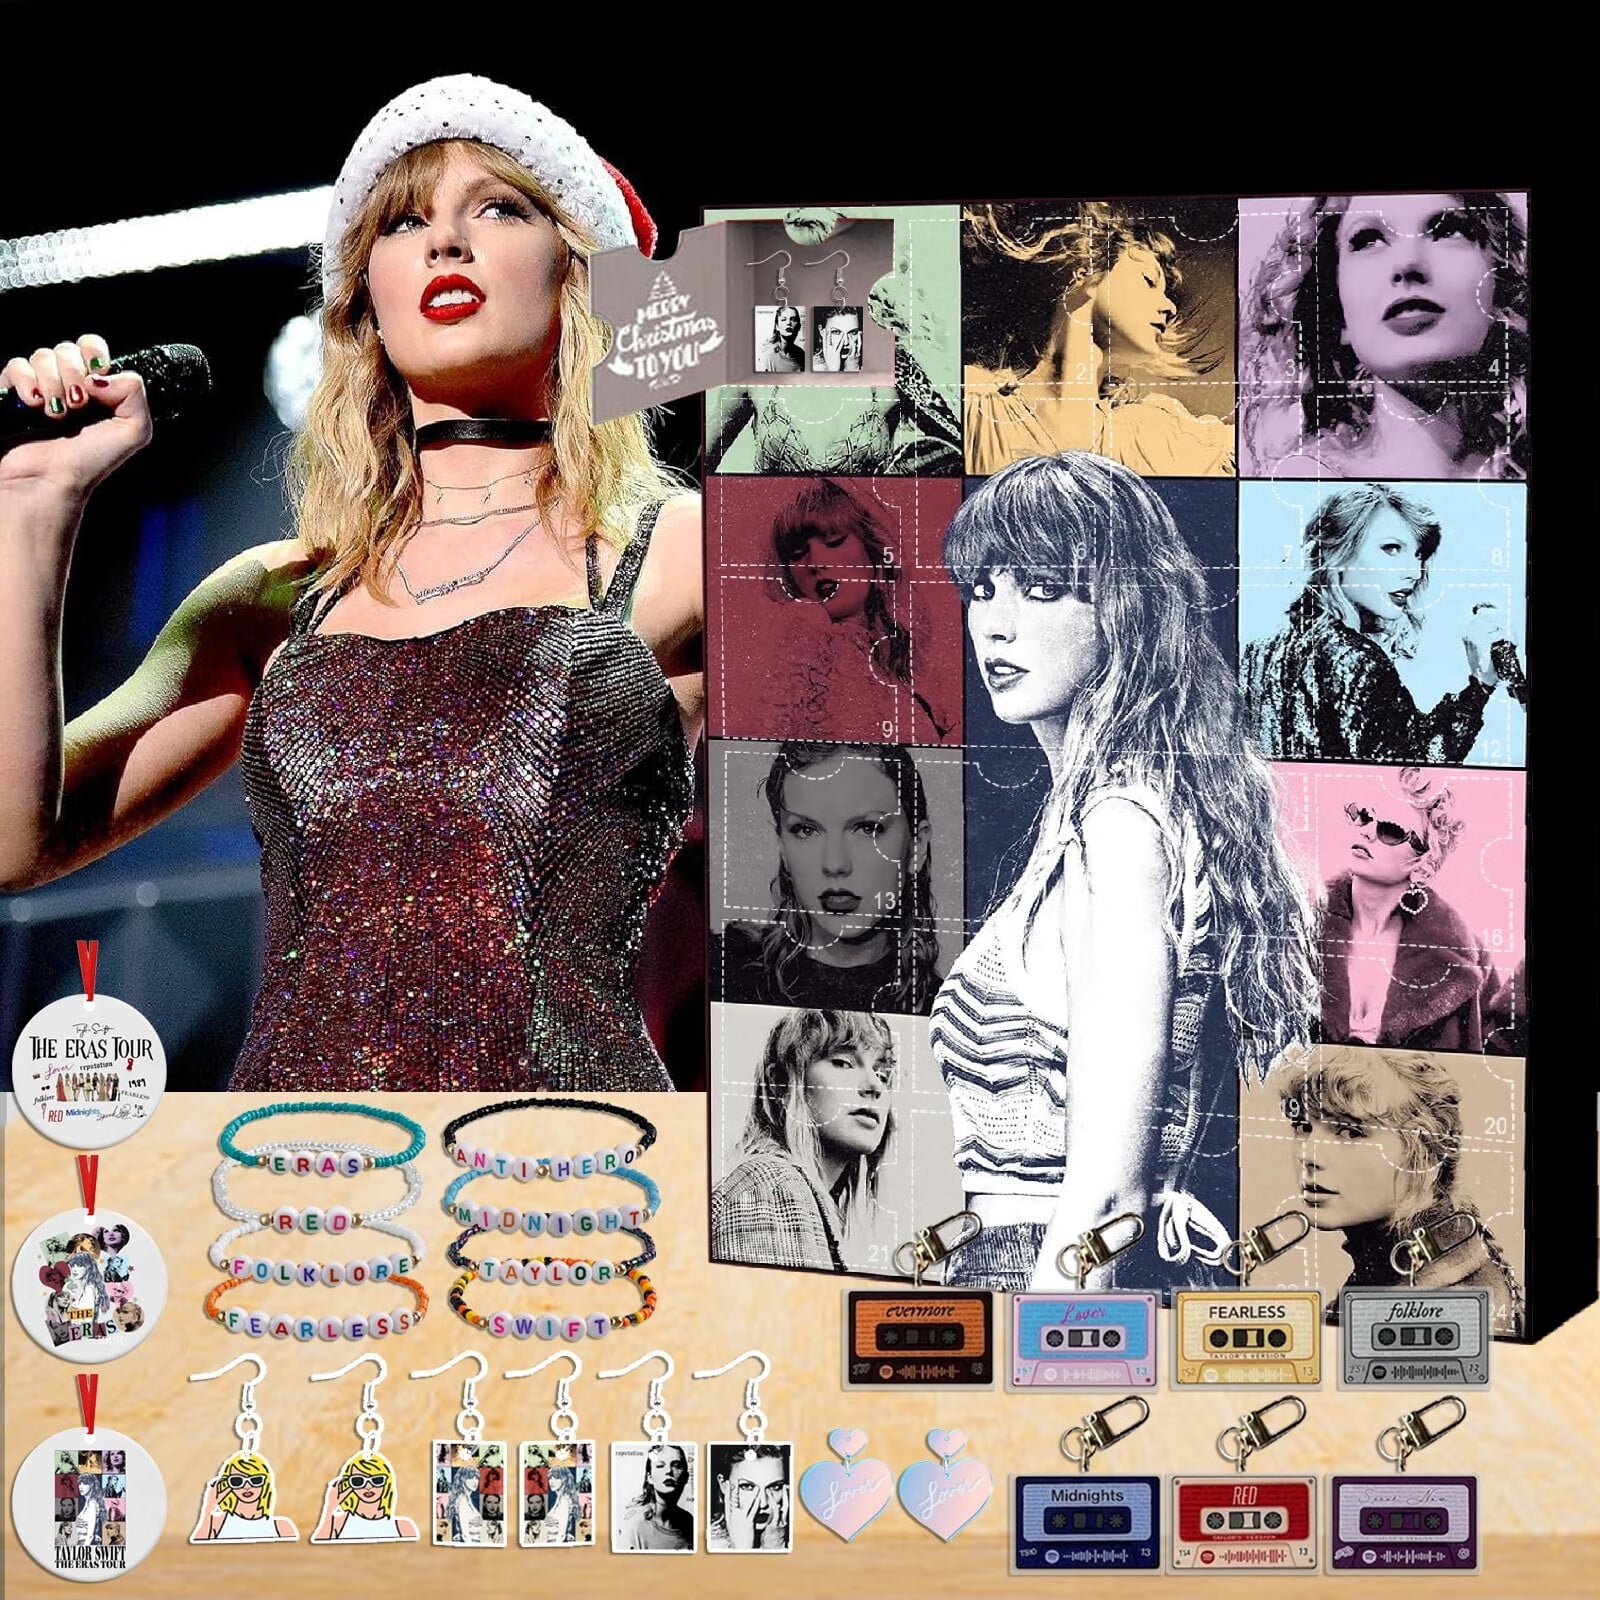 Taylor The Swift 1989 Christmas Advent Calendar Contains 24 Gifts,  Christmas Cute Figures Doll Advent Calendar, Christmas Countdown Calendar  With